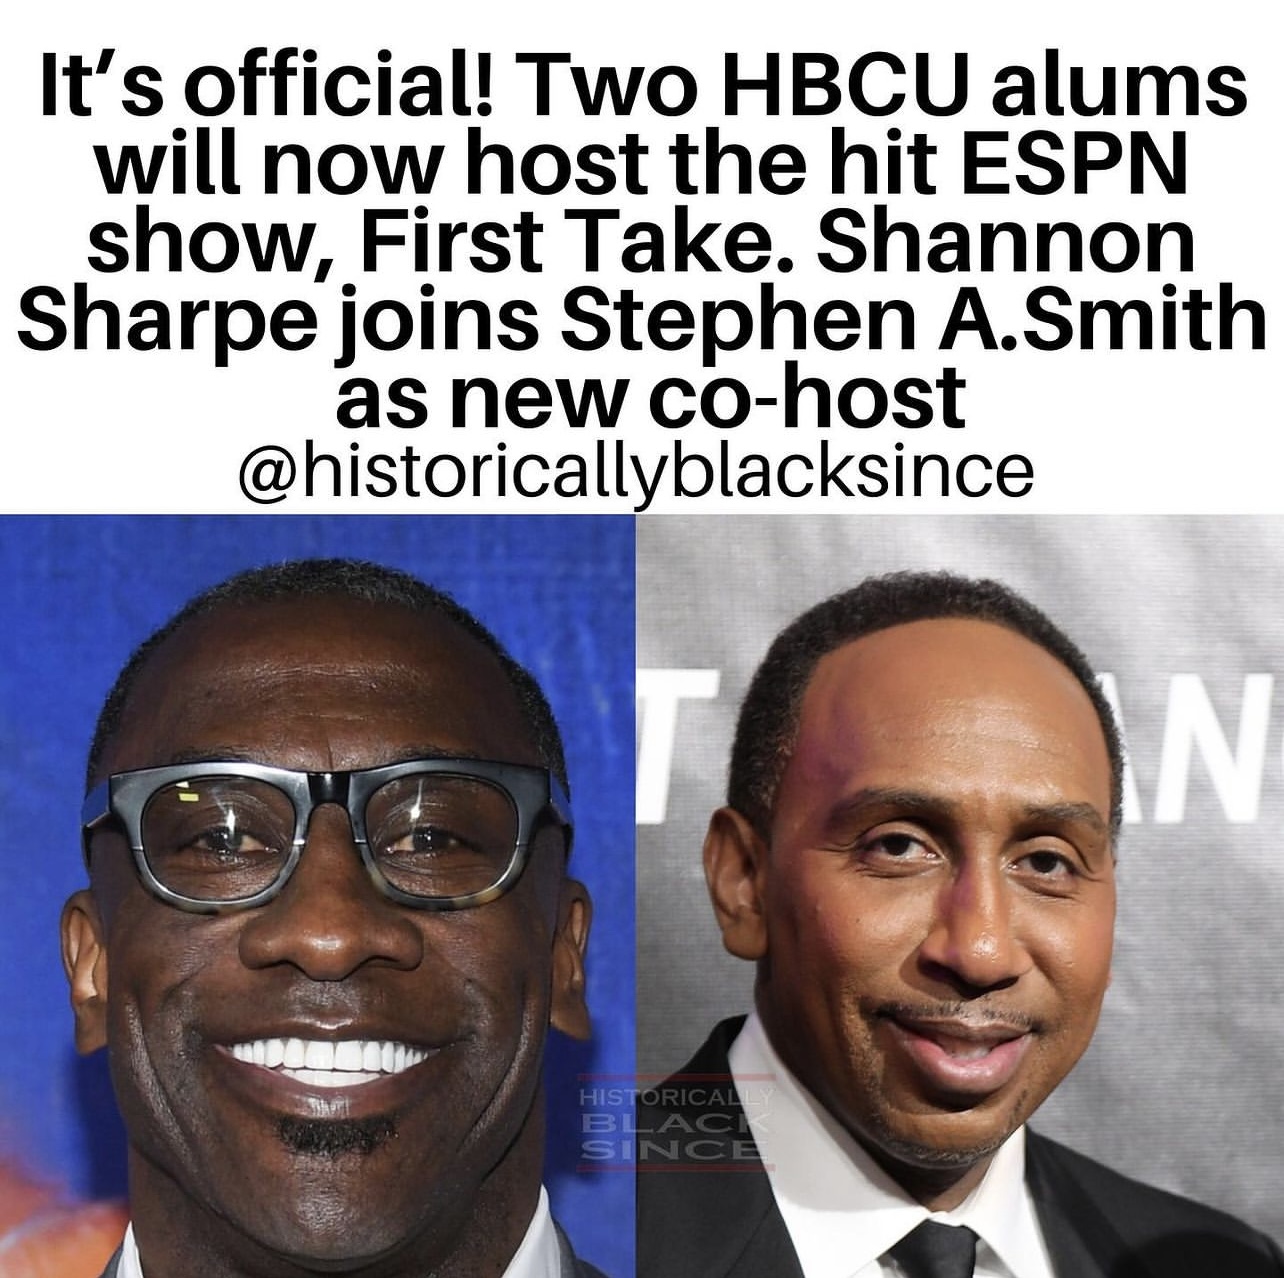 Two HBCU Alums Team up to Host ESPN’s First Take